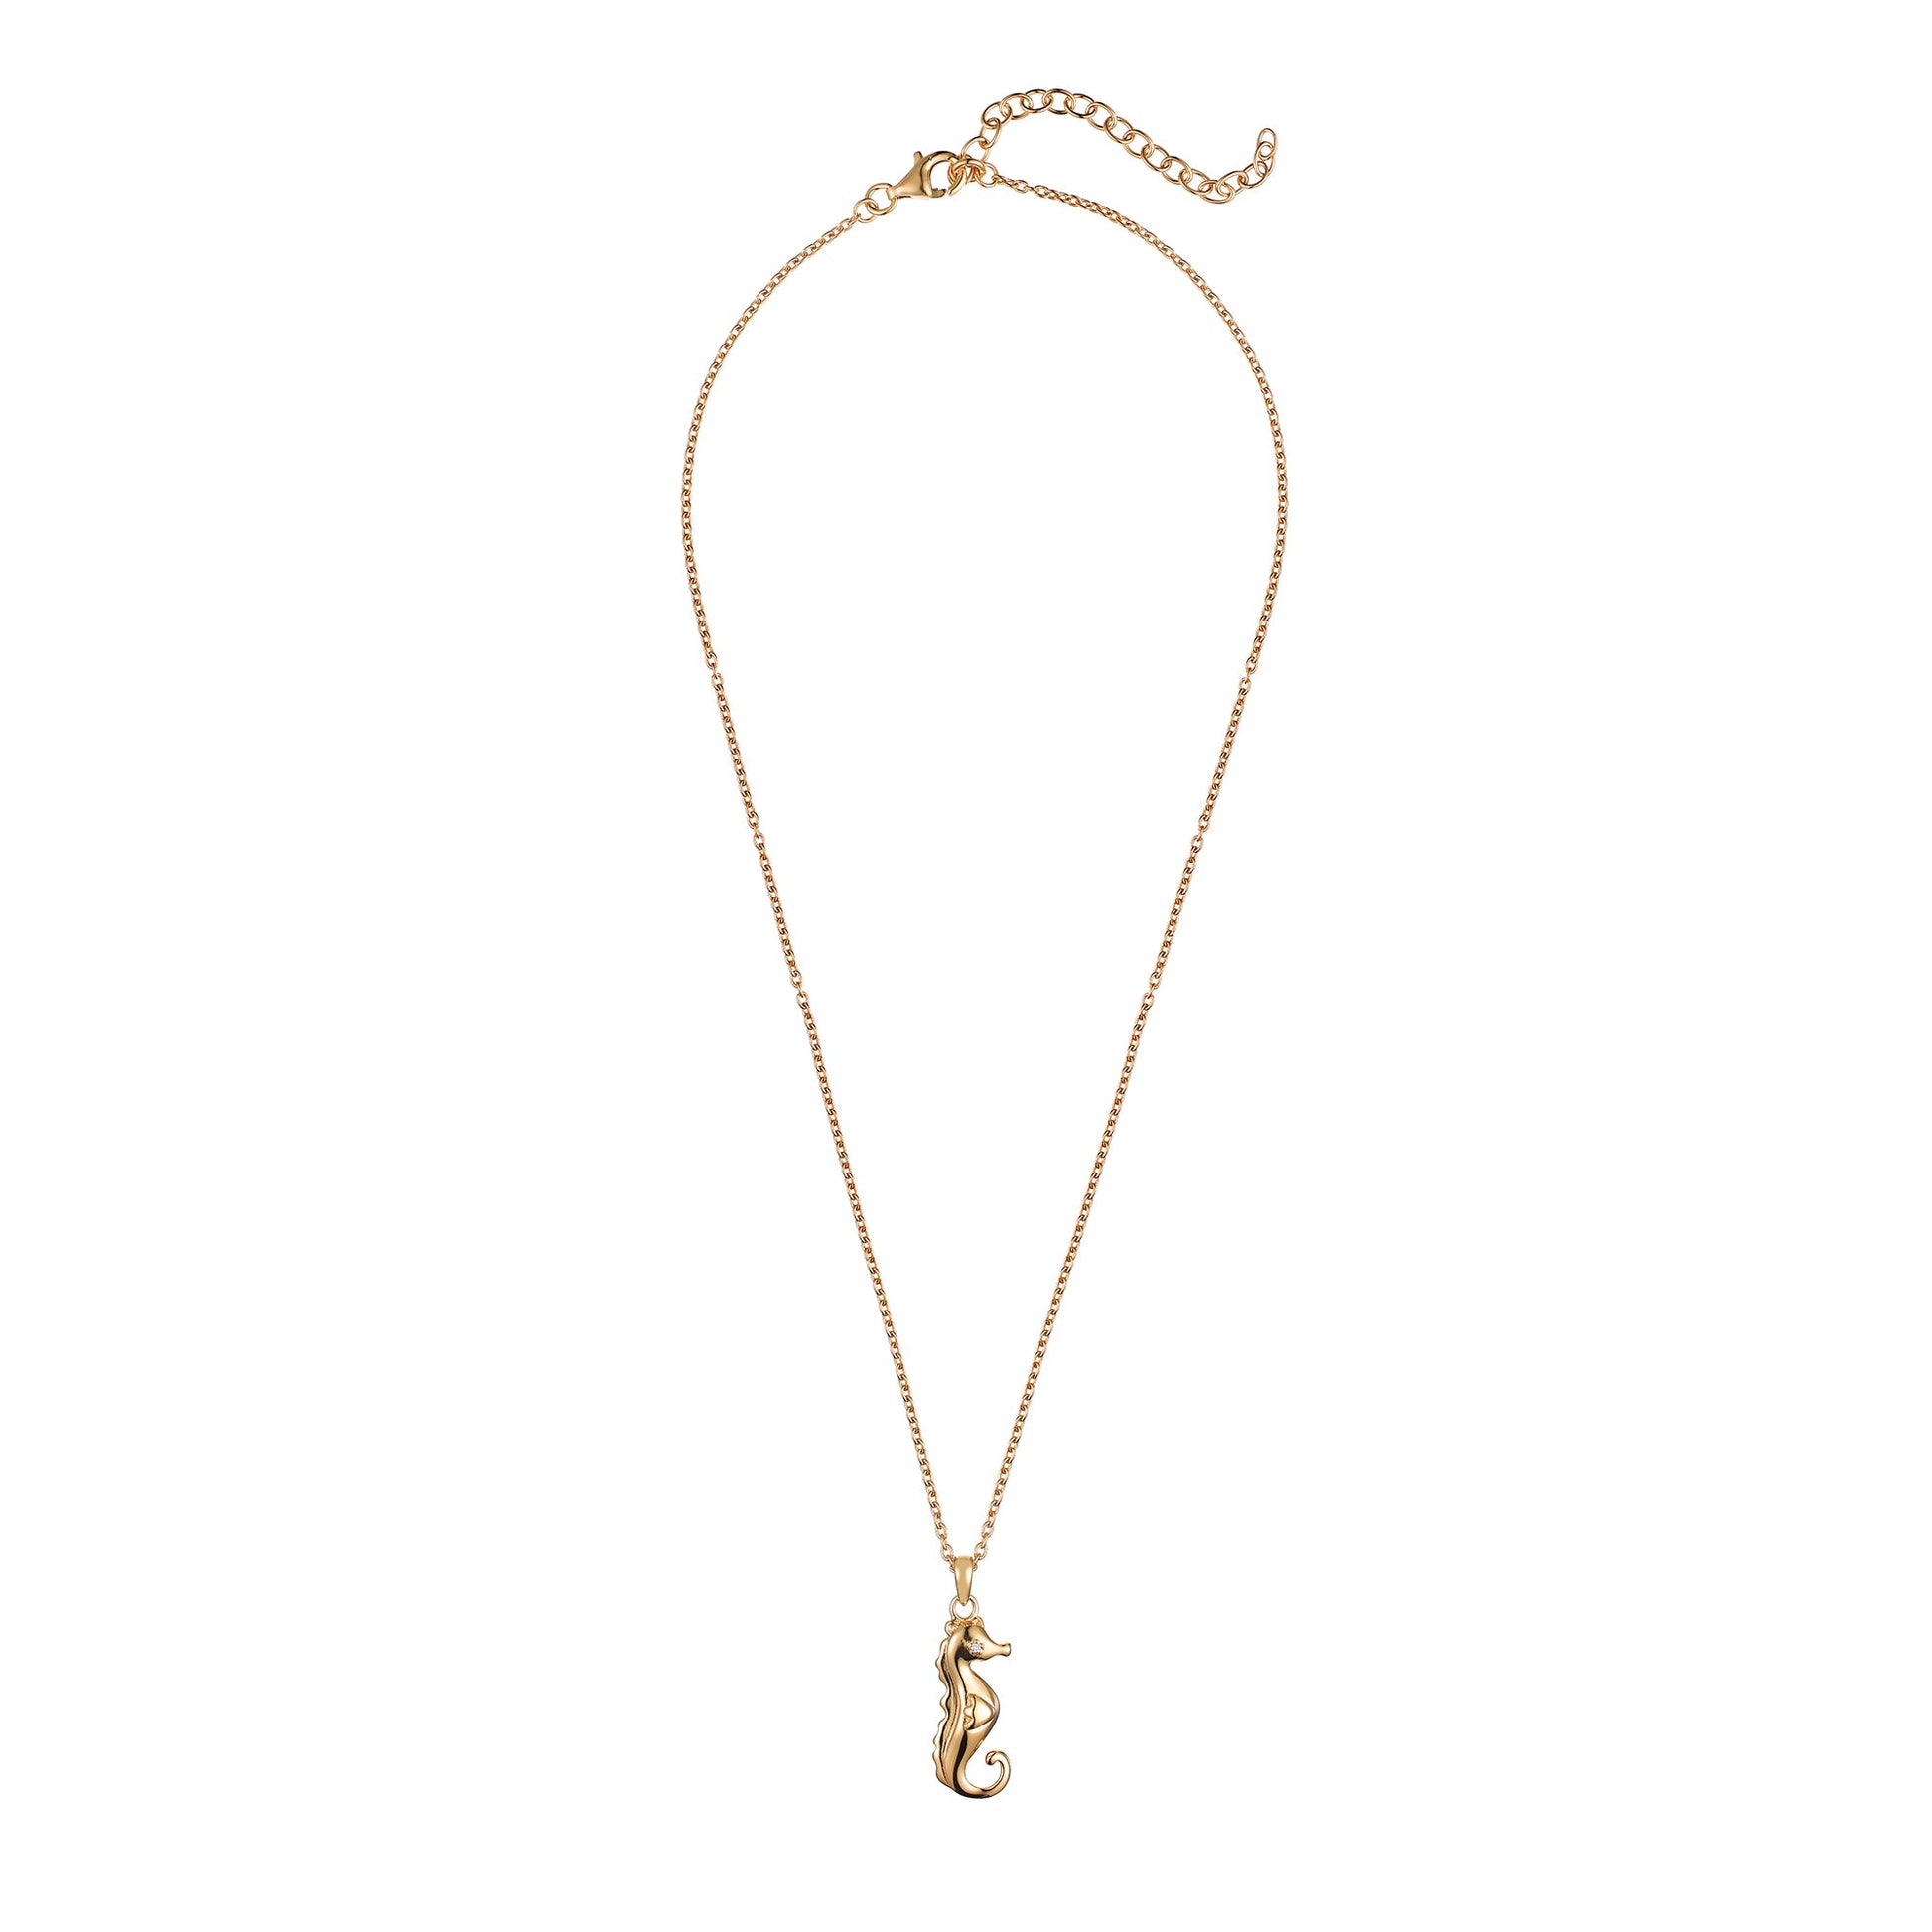 Children's Gold Seahorse with Diamond Eye Pendant on an Extendable Chain Necklace